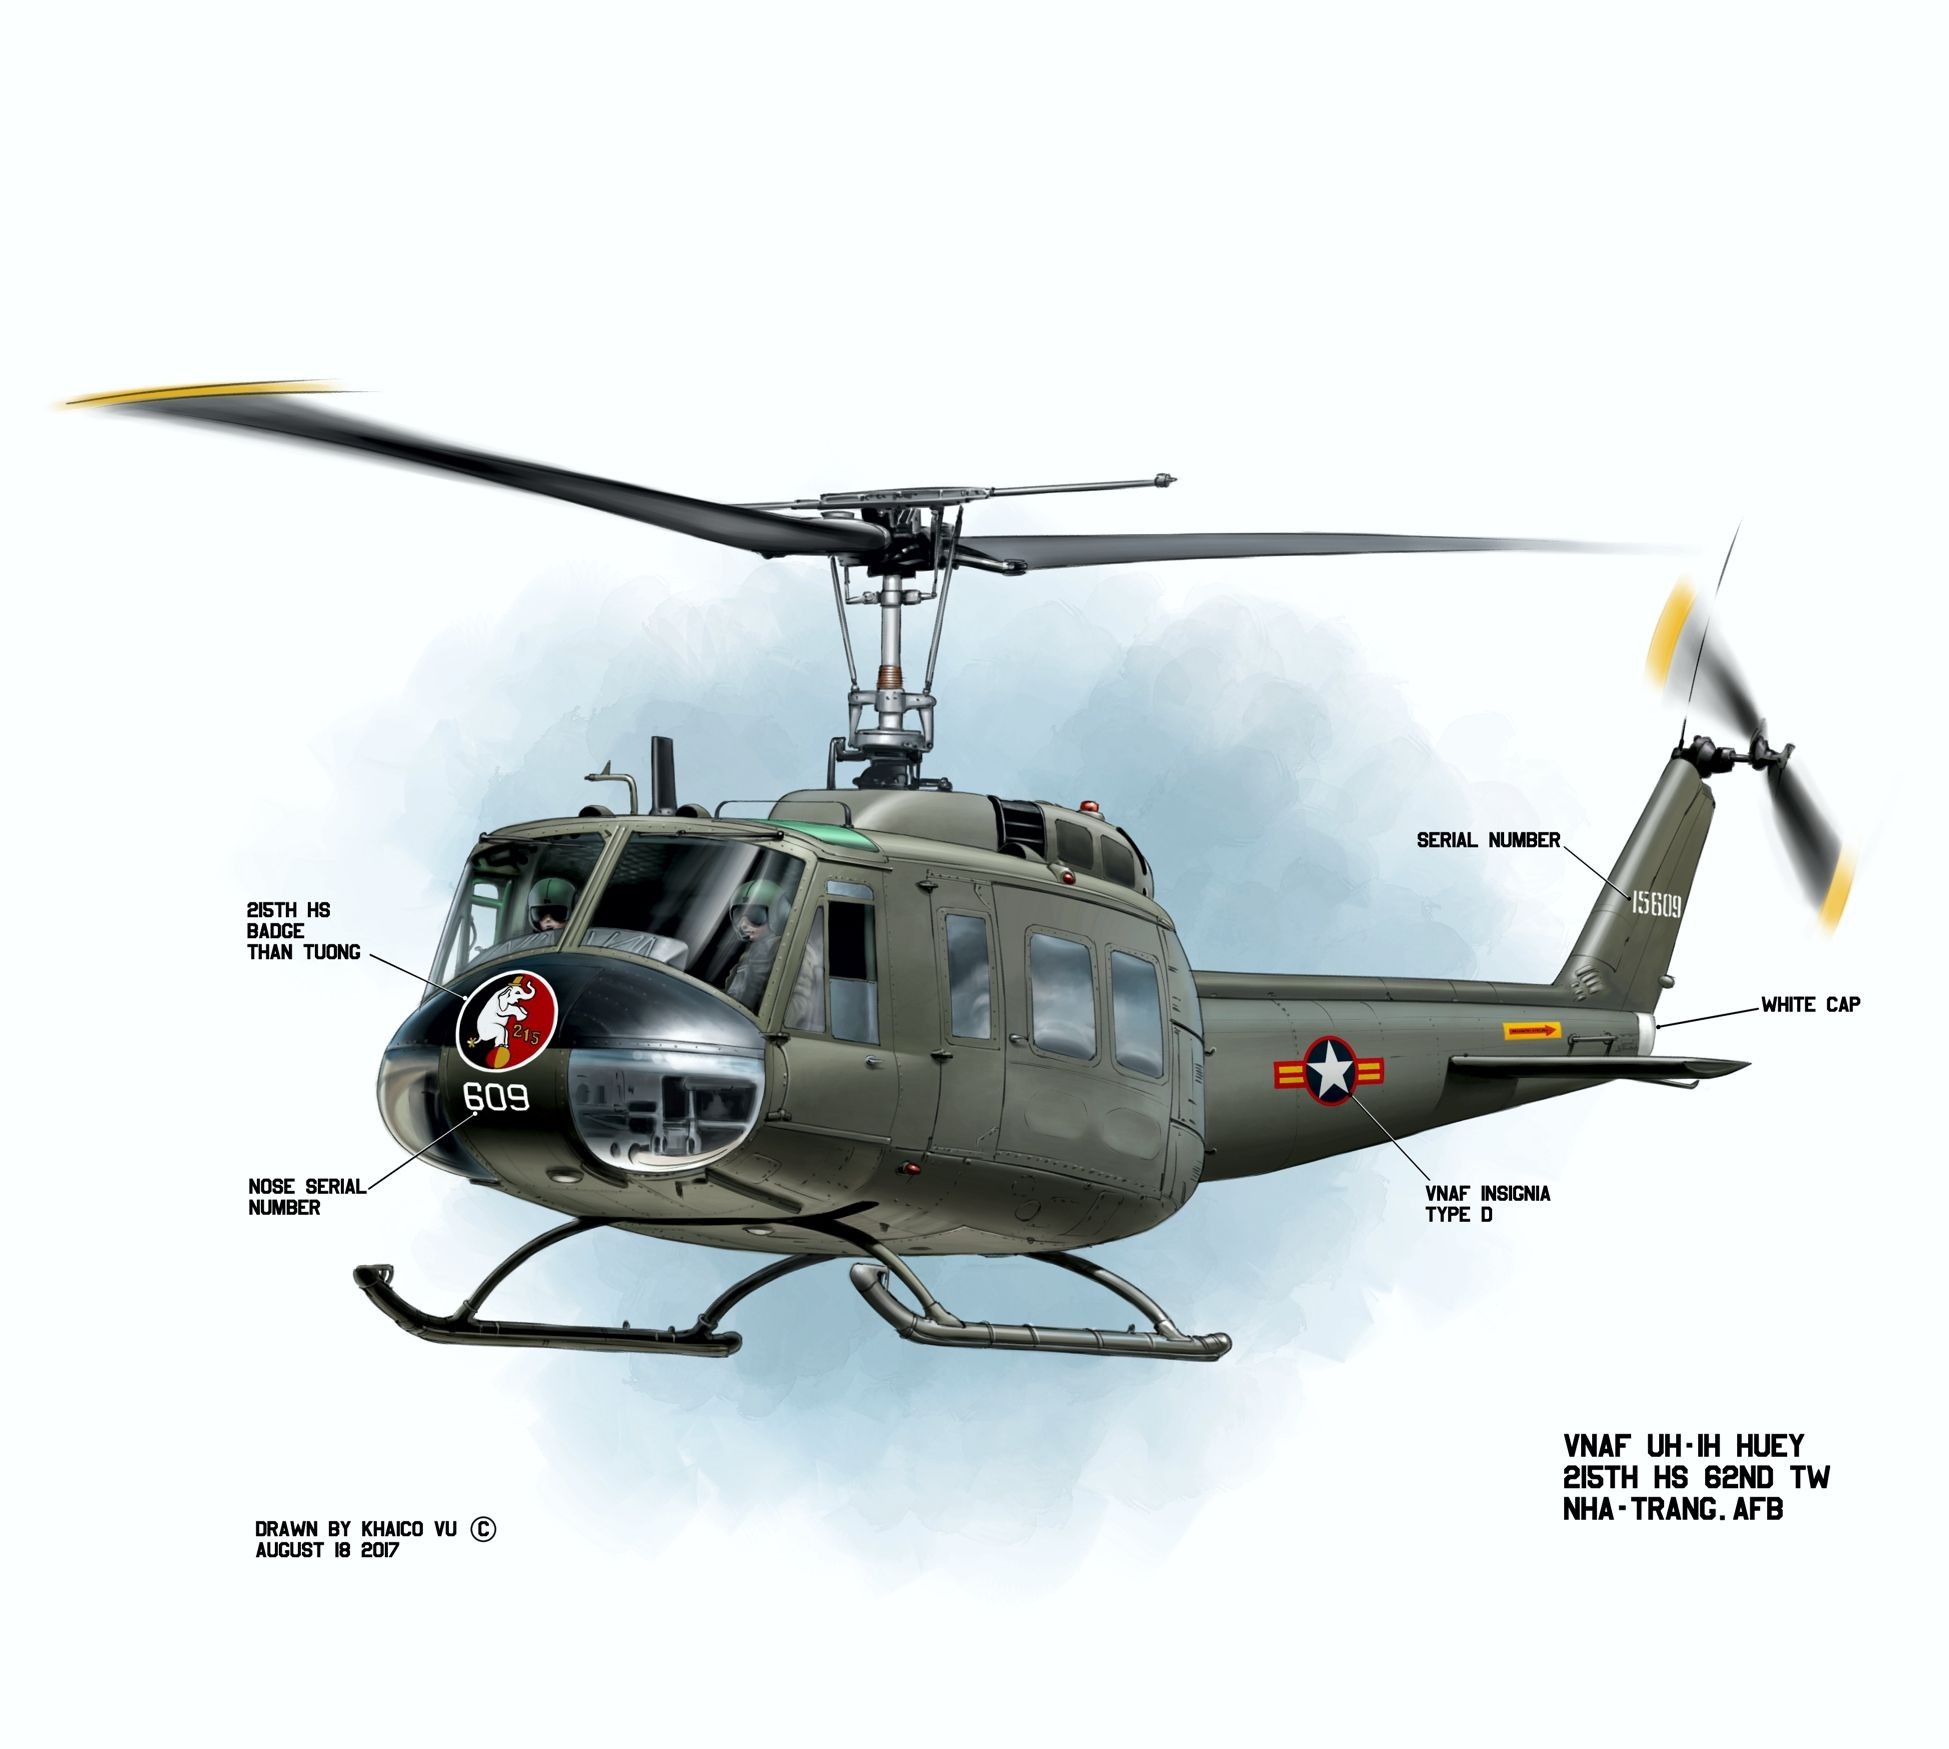 Papercraft Helicopter Vnaf Uh 1 Huey Unit Markings Reference for Decal Manufacture